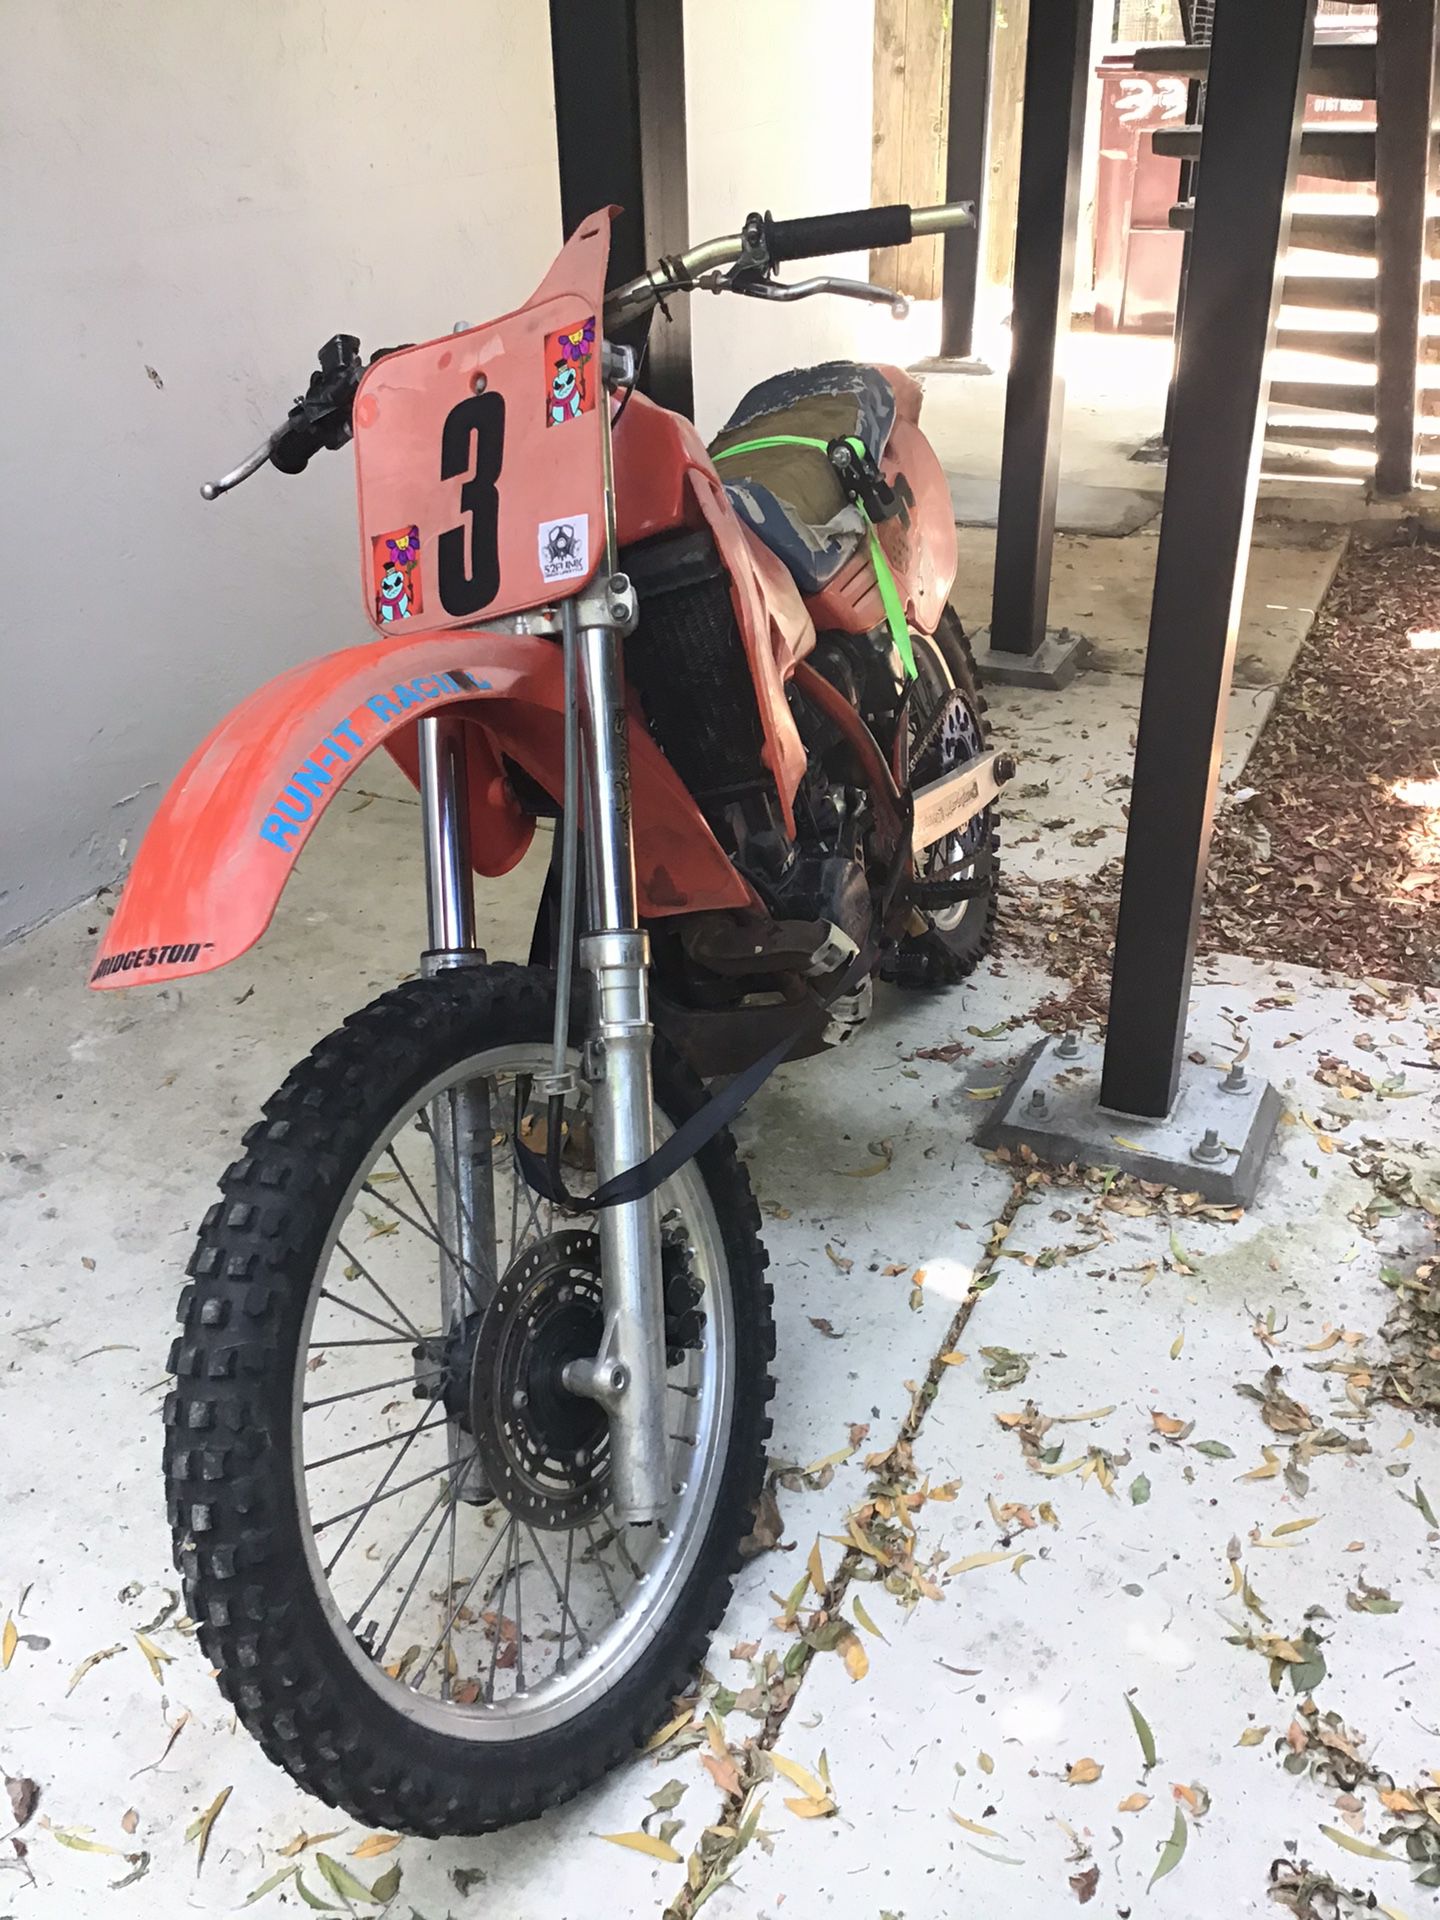 Cr500 1985 Dirtbike nothings wrong with it it runs and starts up I don’t have no pink slip It’s a two-stroke no I Ballers if you have cash and money